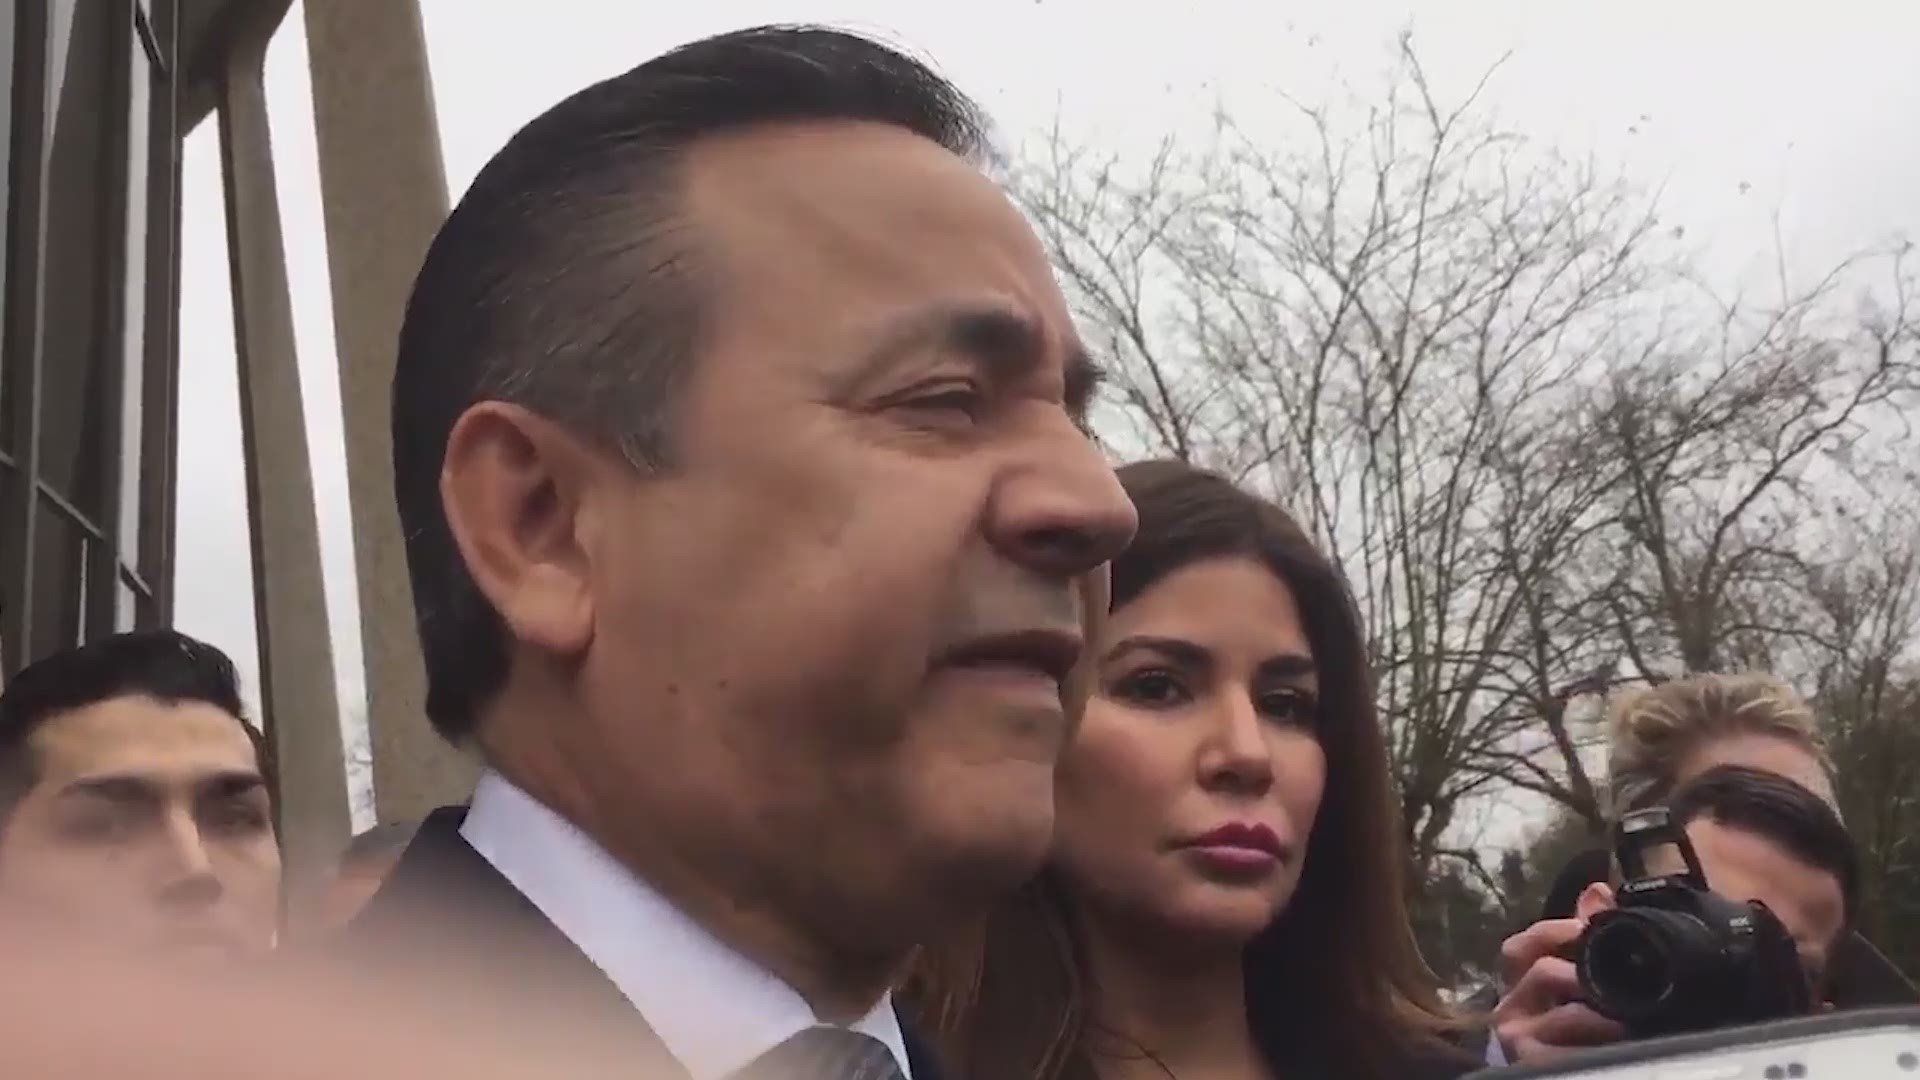 State Senator Carlos Uresti says he plans on appealing the guilty verdict in a federal fraud case.